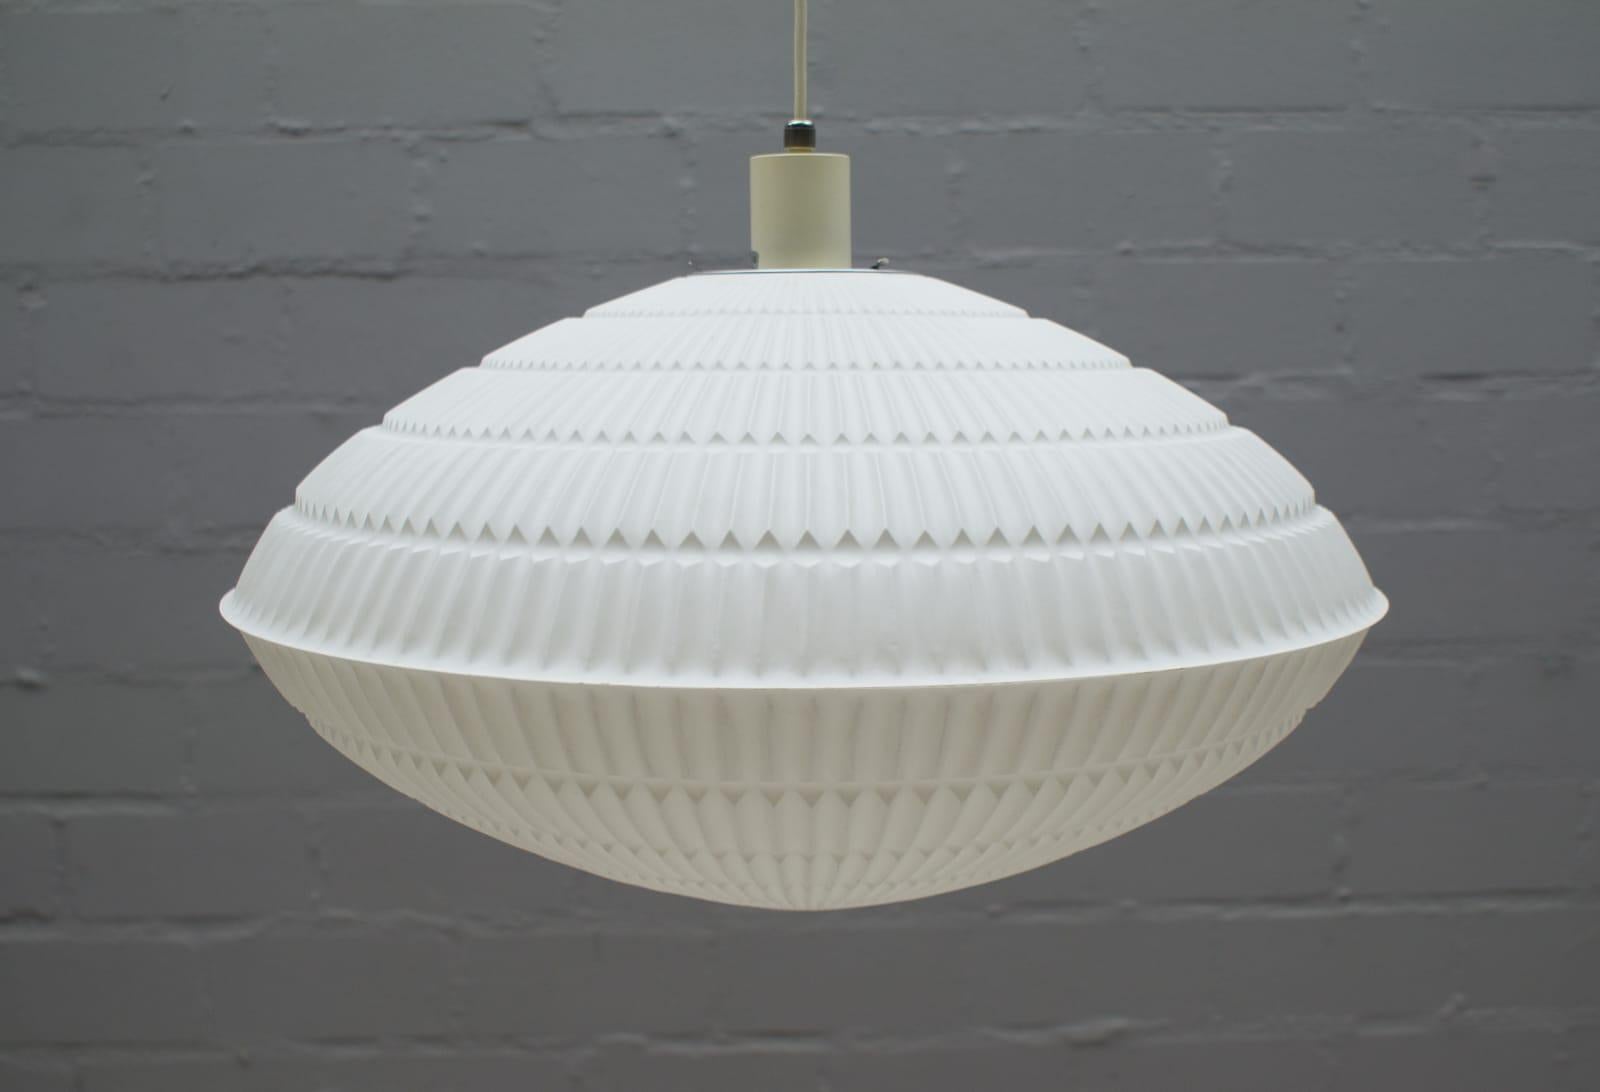 Geometric Pendant Lamp by Aloys F. Gangkofner for Erco Leuchten, Germany, 1960s In Good Condition For Sale In Nürnberg, Bayern